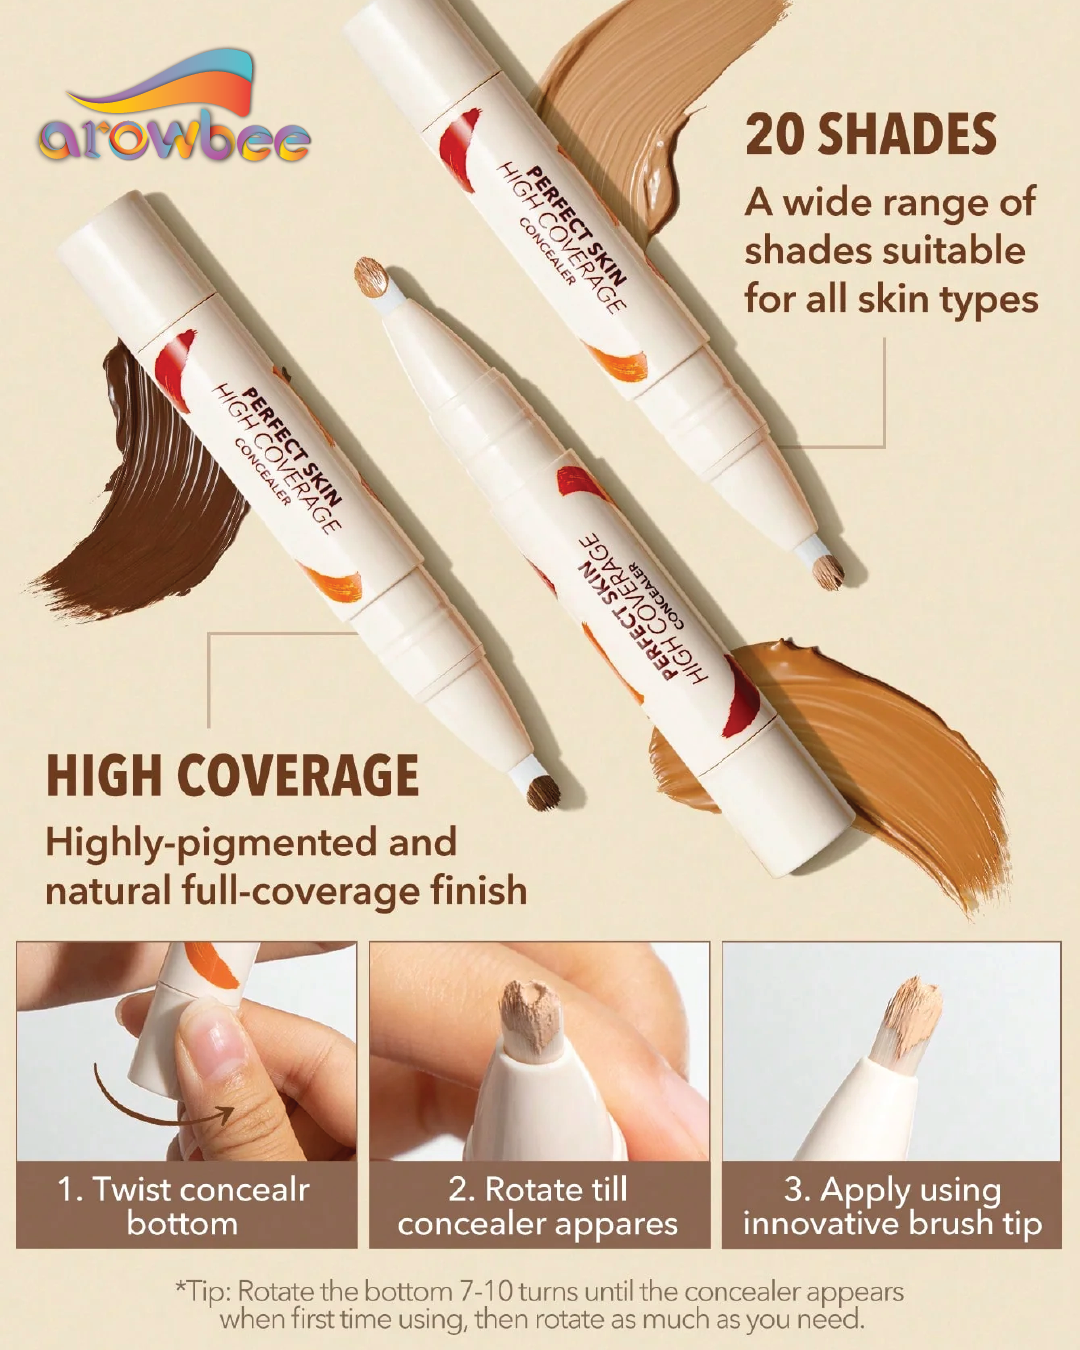 SHEGLAM Perfect Skin High Coverage Concealer – Arowbee